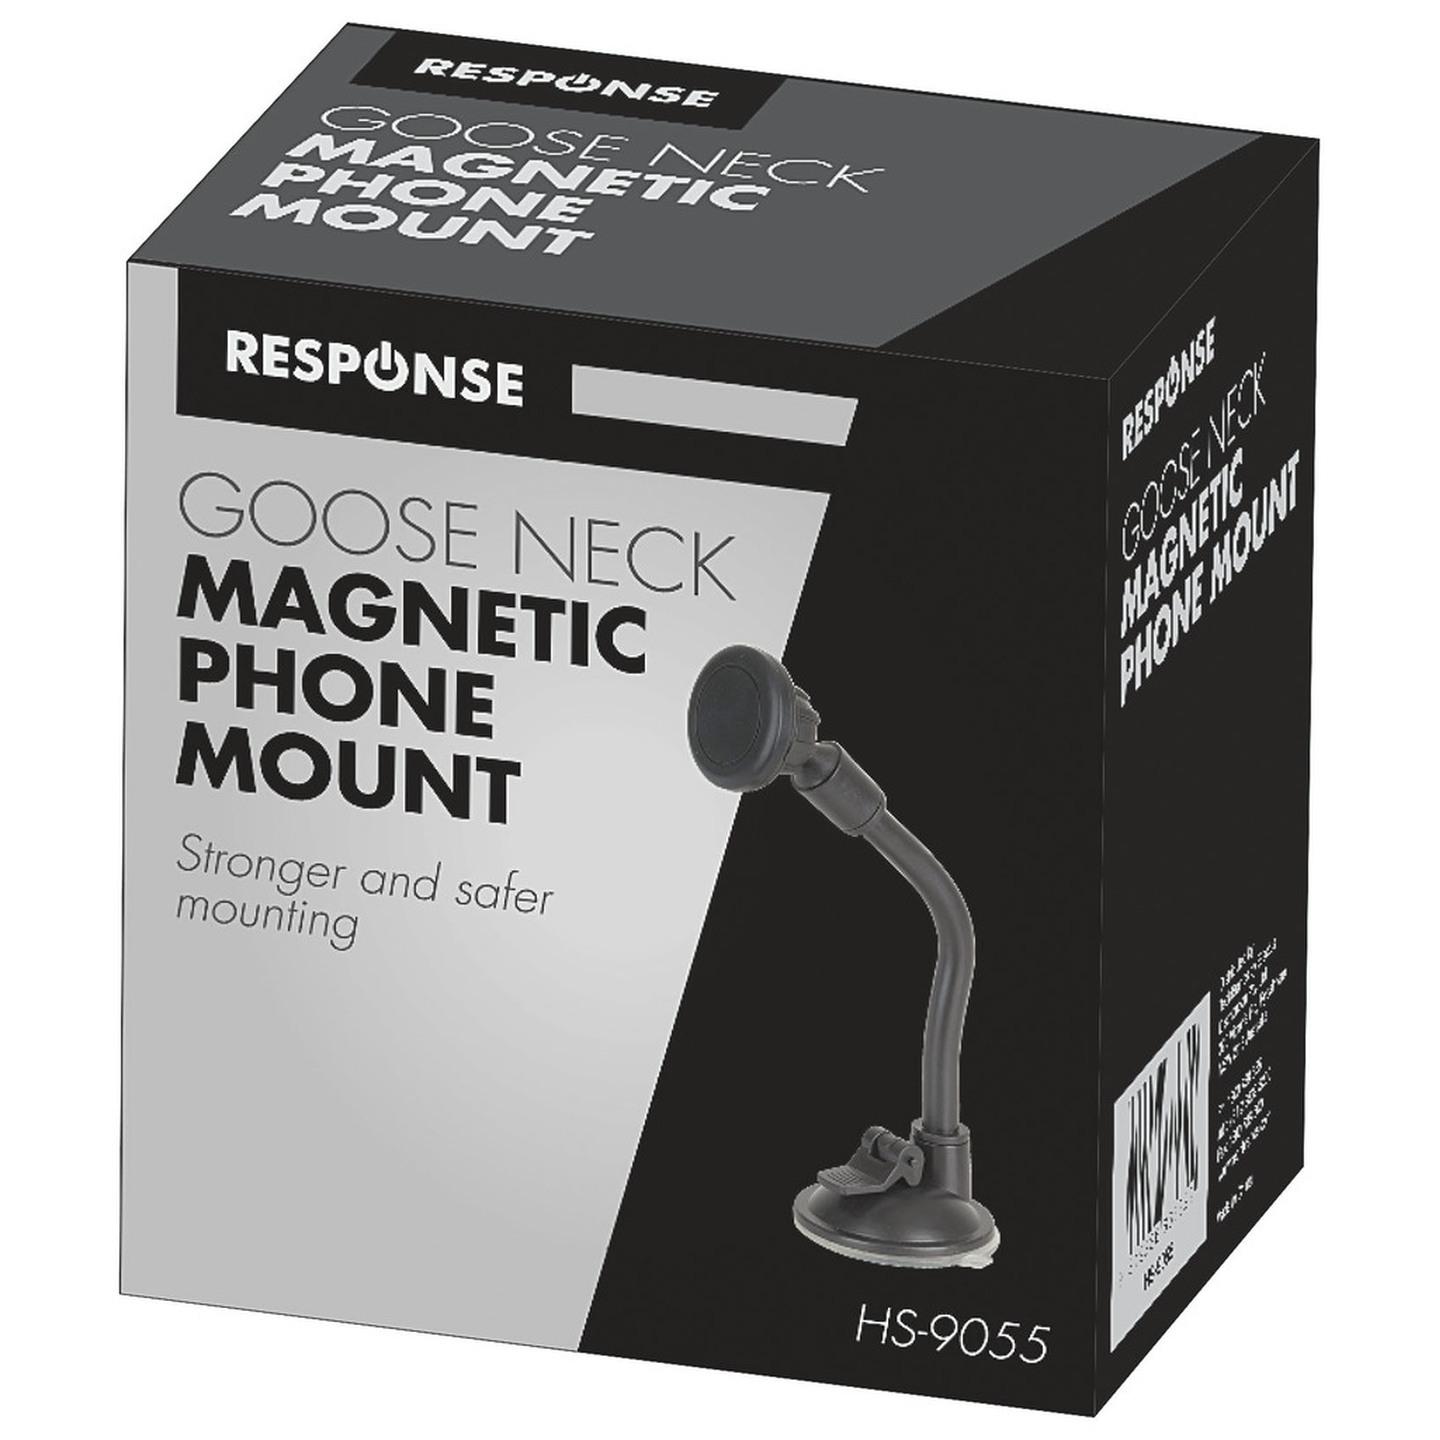 Large Flexible Magnetic Phone Bracket and Mount